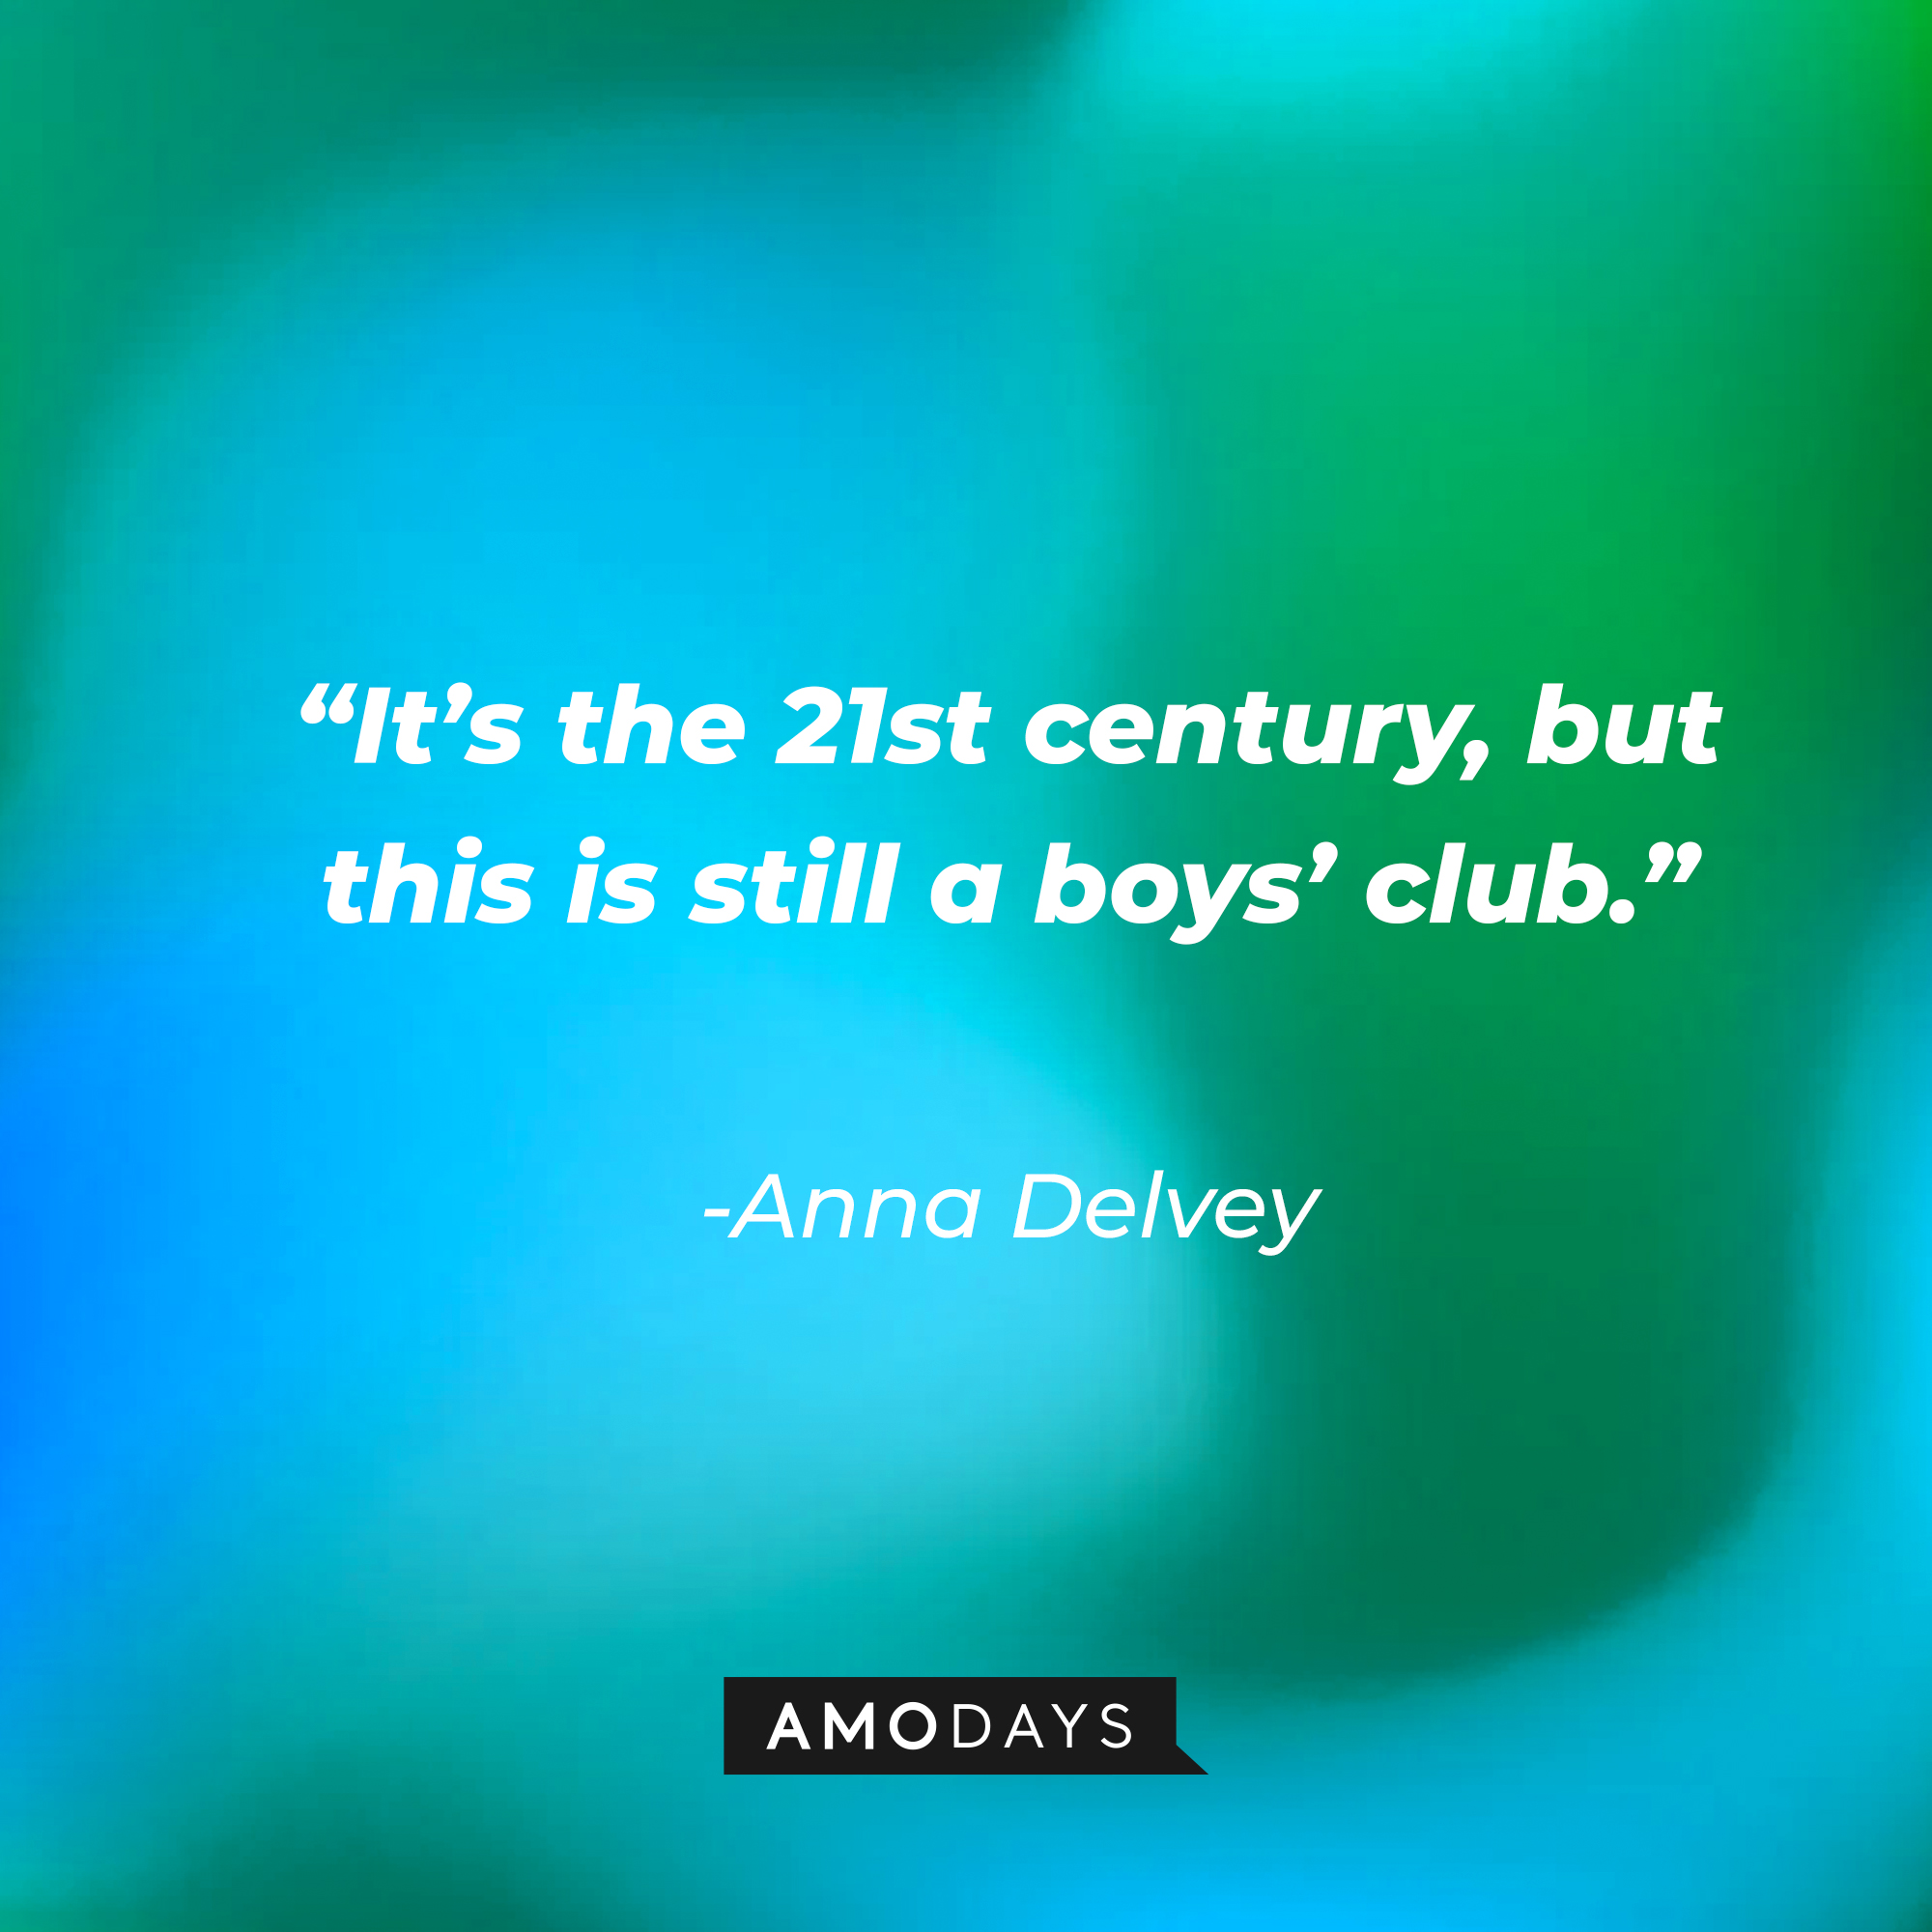 Julia Garner’s portrayal/version of Anna Delvey’s quote: “It’s the 21st century, but this is still a boys’ club.” | Source: AmoDays